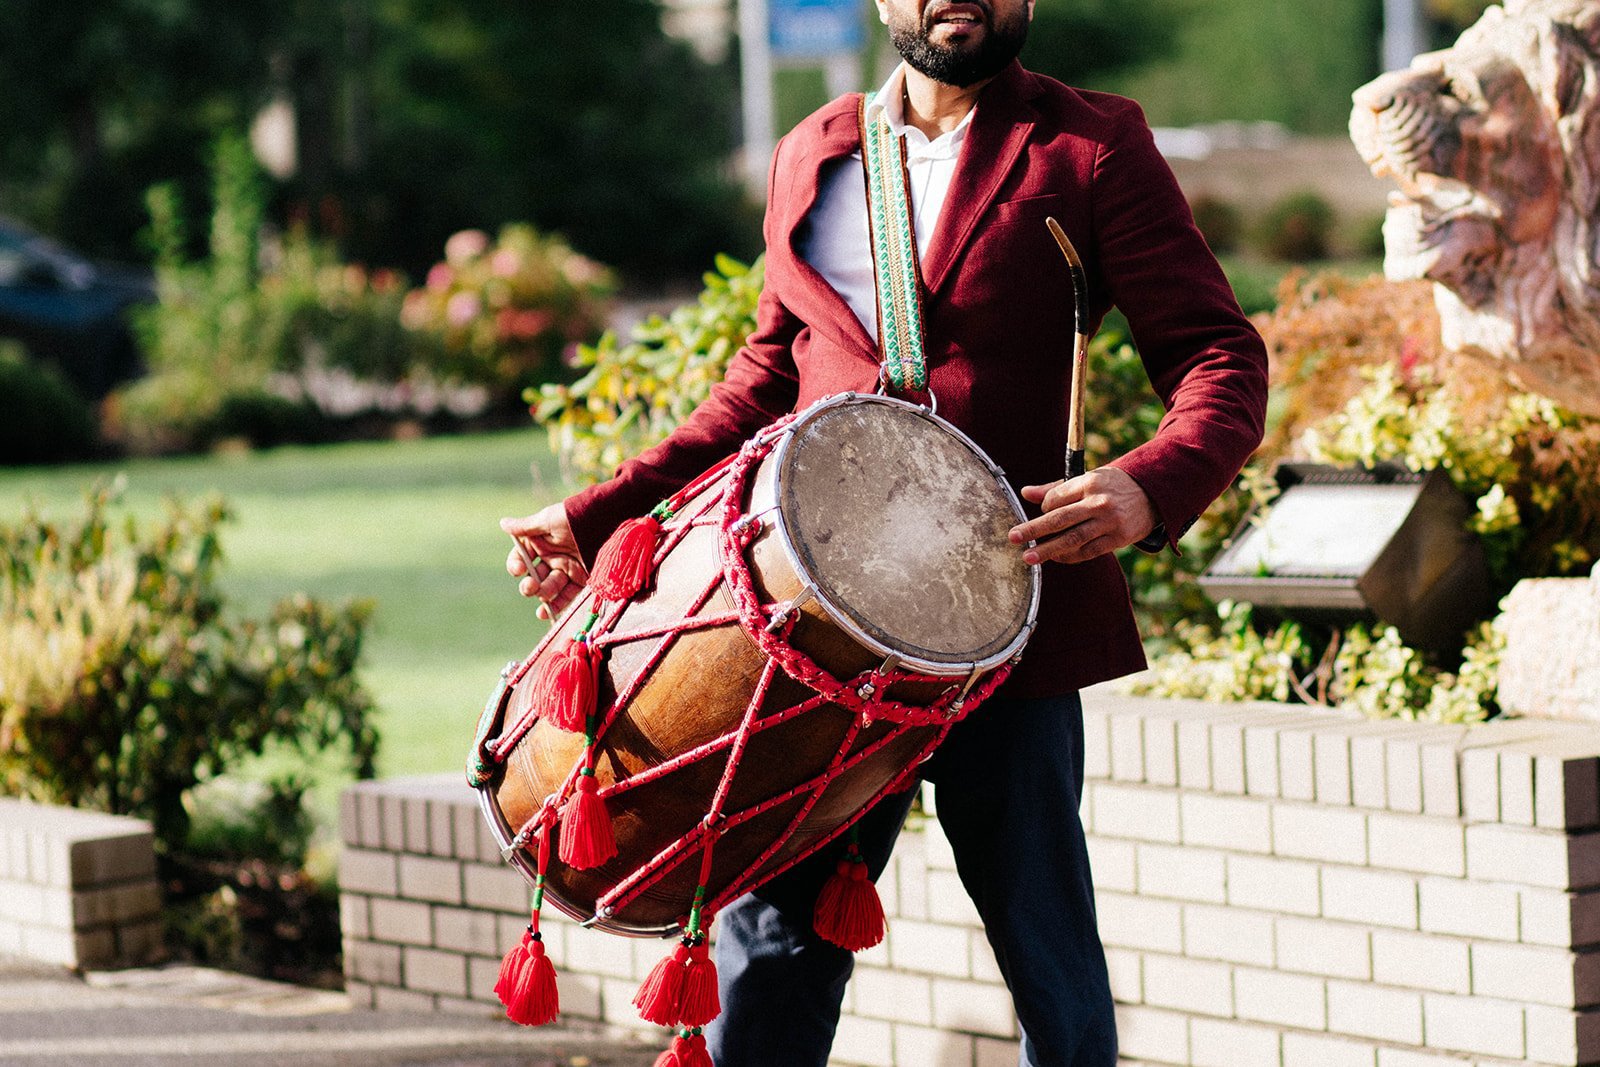 A dol player drums outside of an indian temple in surrey BC 